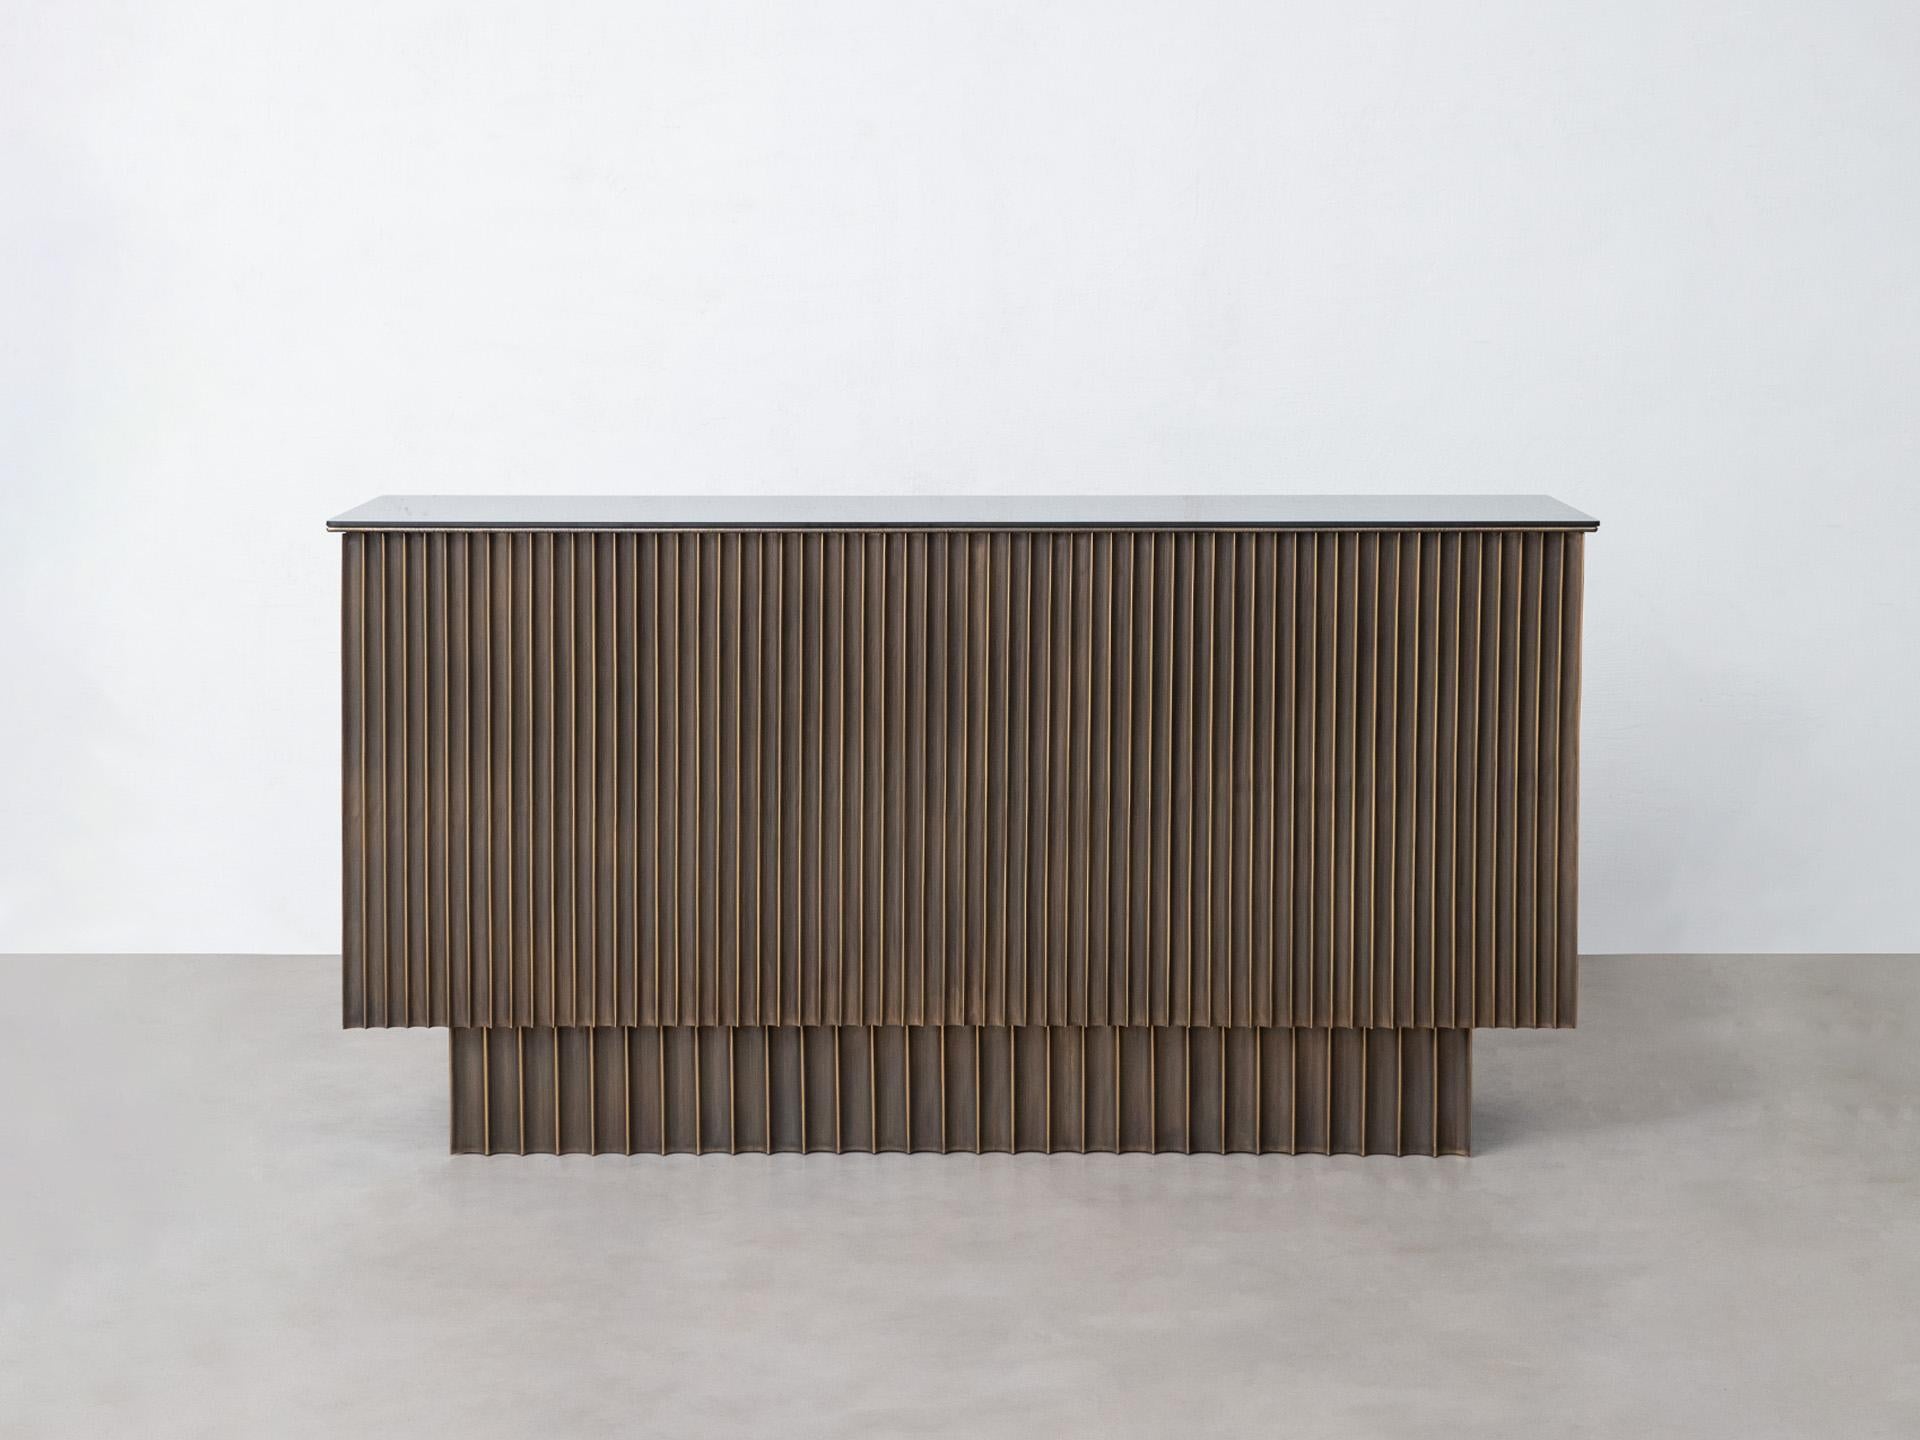 With an organic facade made of fluted brass, this sculptural console is inspired by Art Deco. Breaking away from the traditional confines of geometry, the console explores the dynamism of sheet brass and the highly-skilled technique of fluting, in